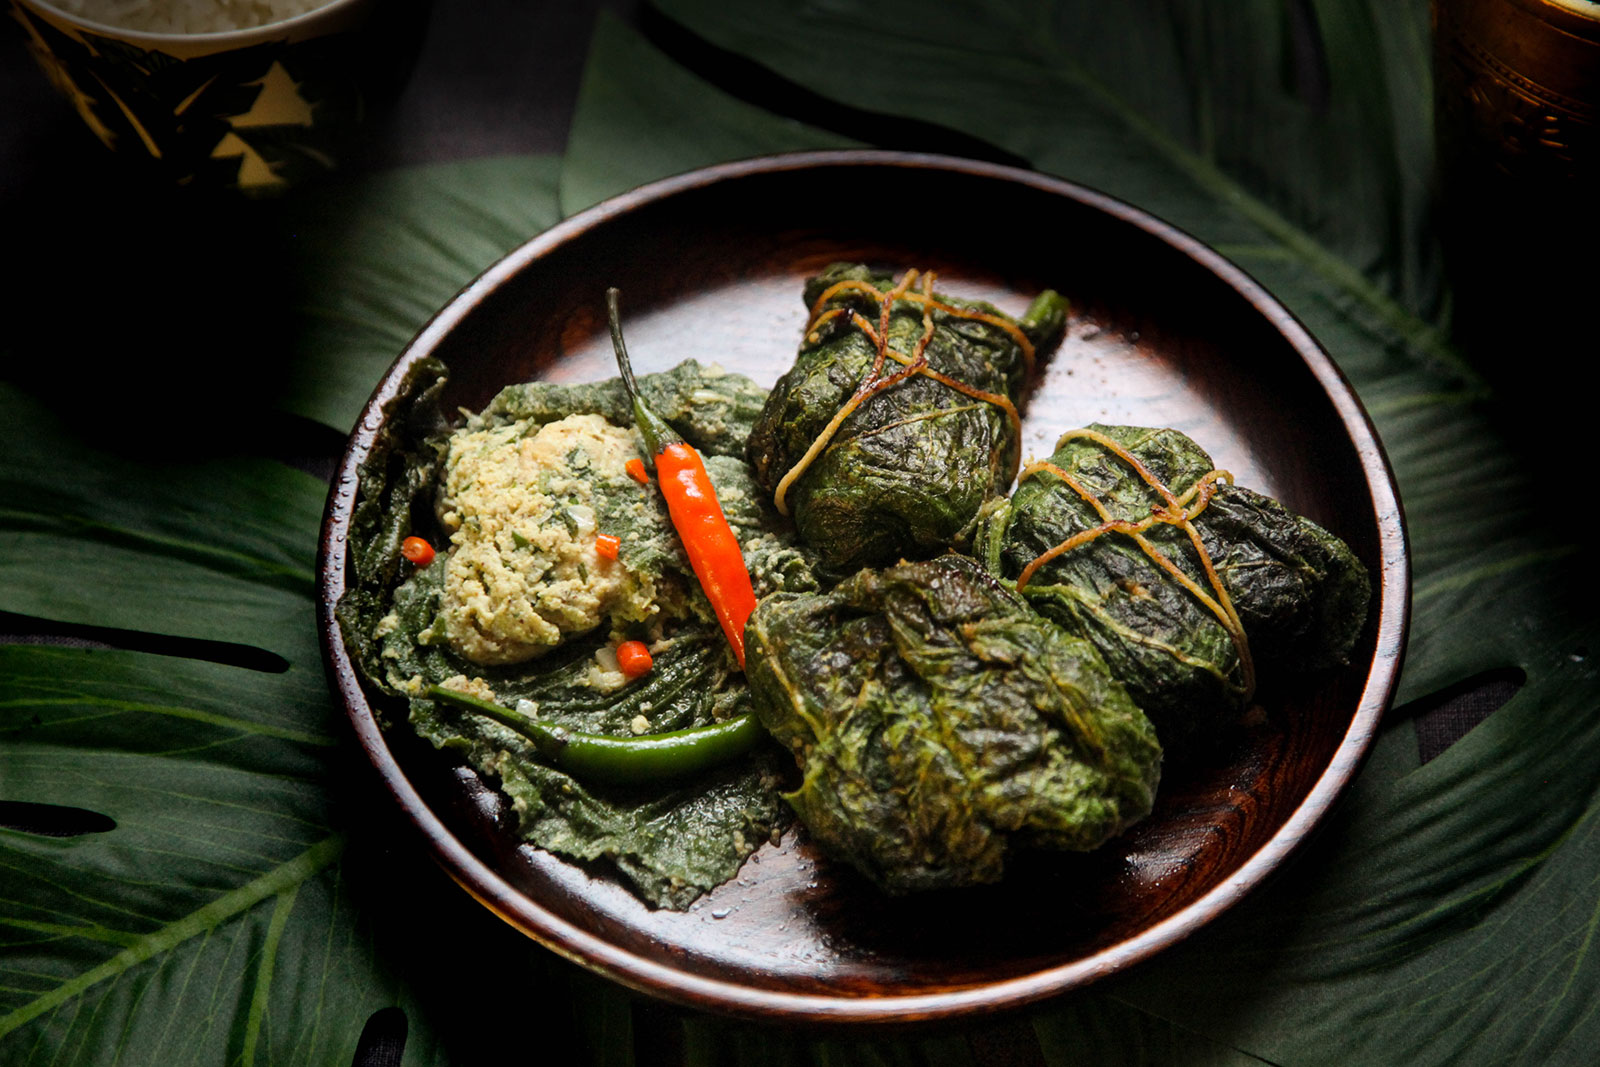 Paturi of Chicken Parcels wrapped in Squash Leaves shown on plate